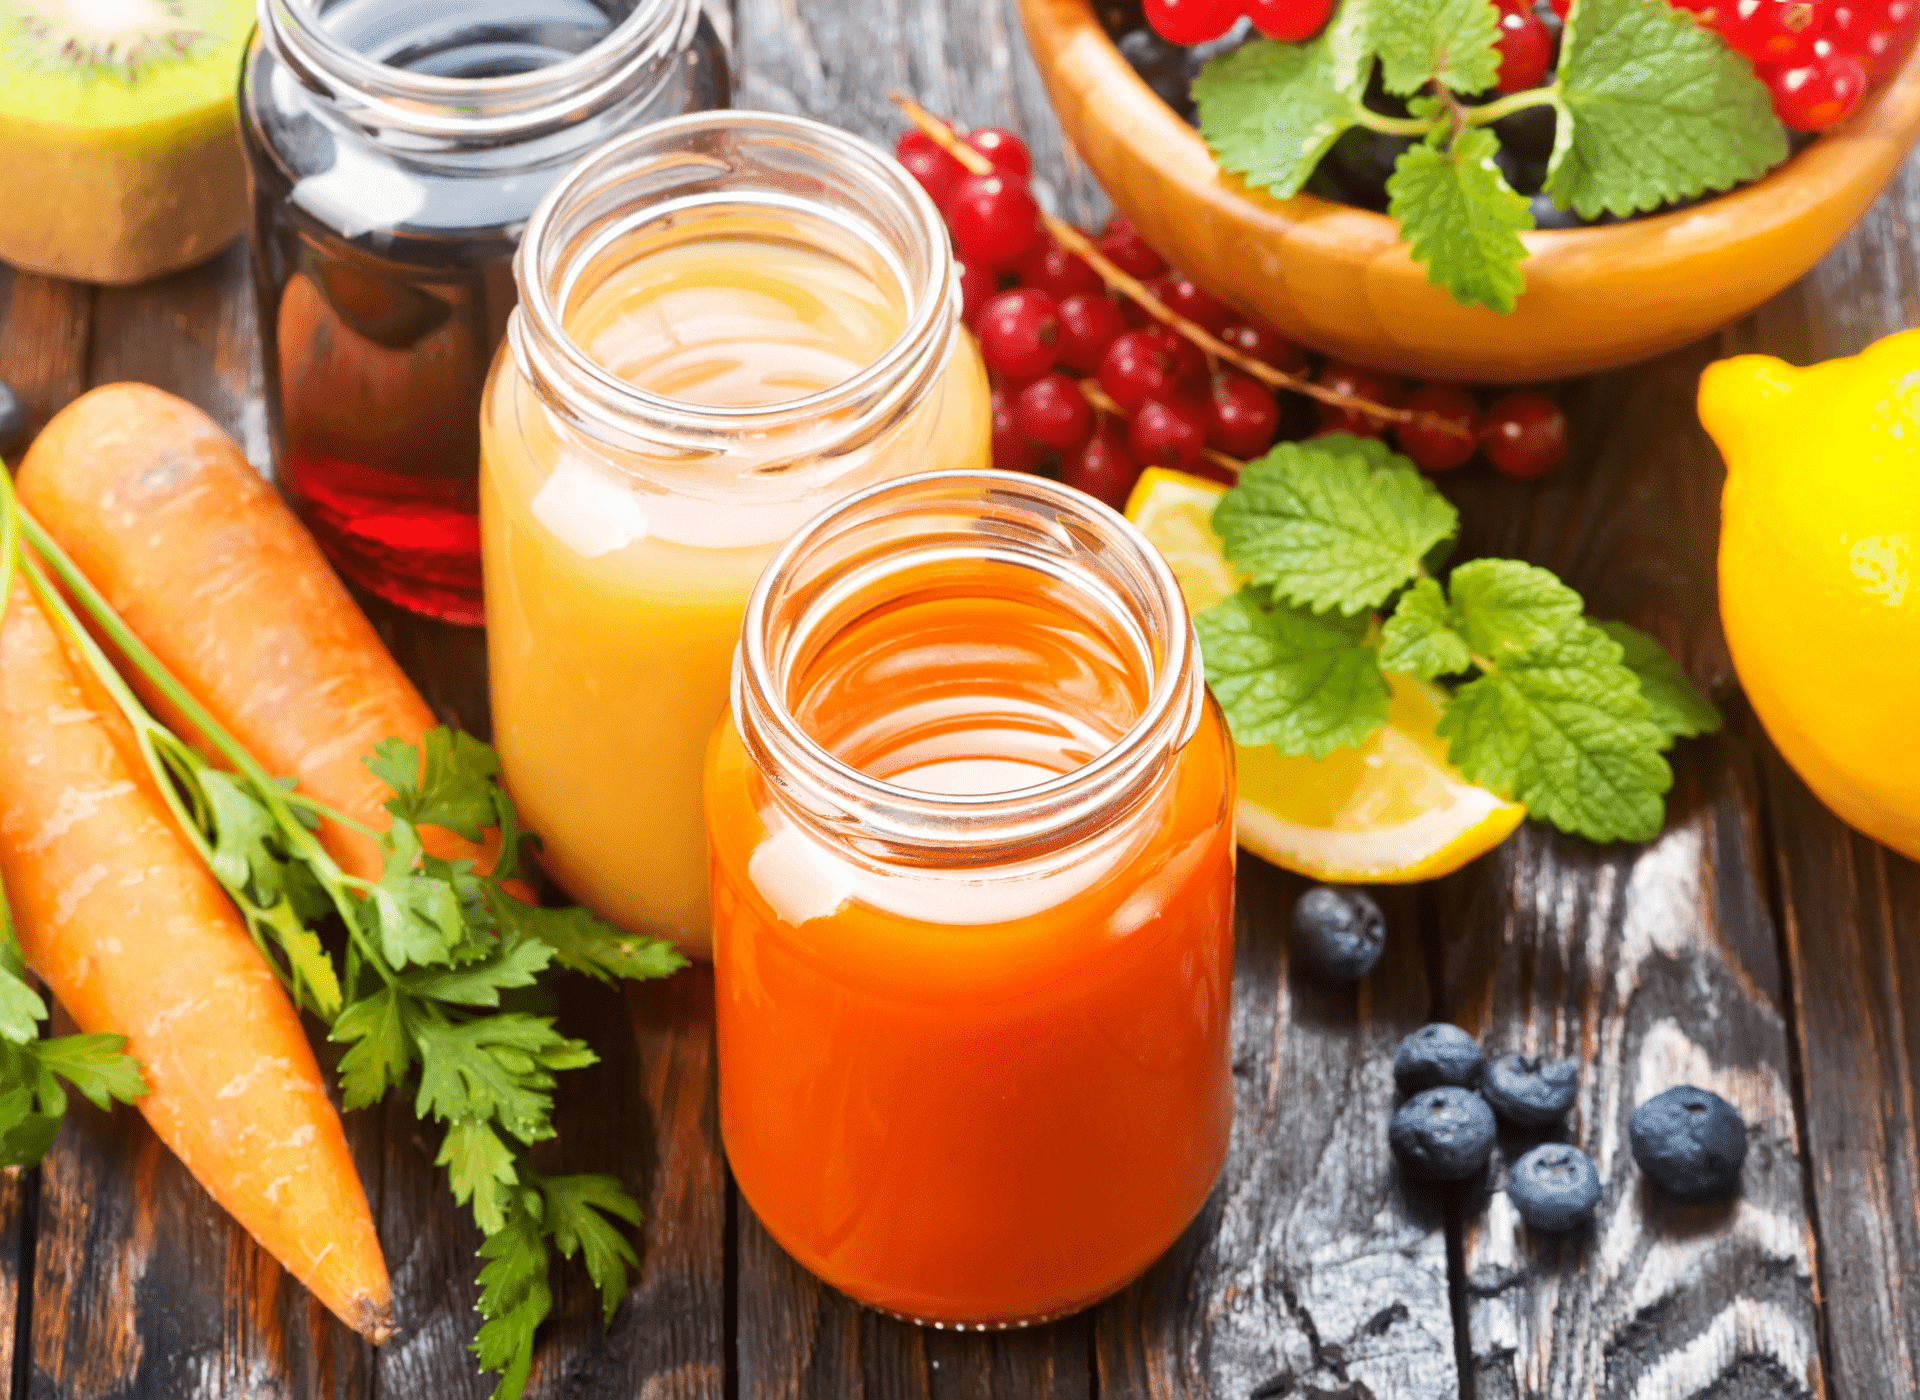 Pressed juices and smoothies, 5 combinations to try this summer